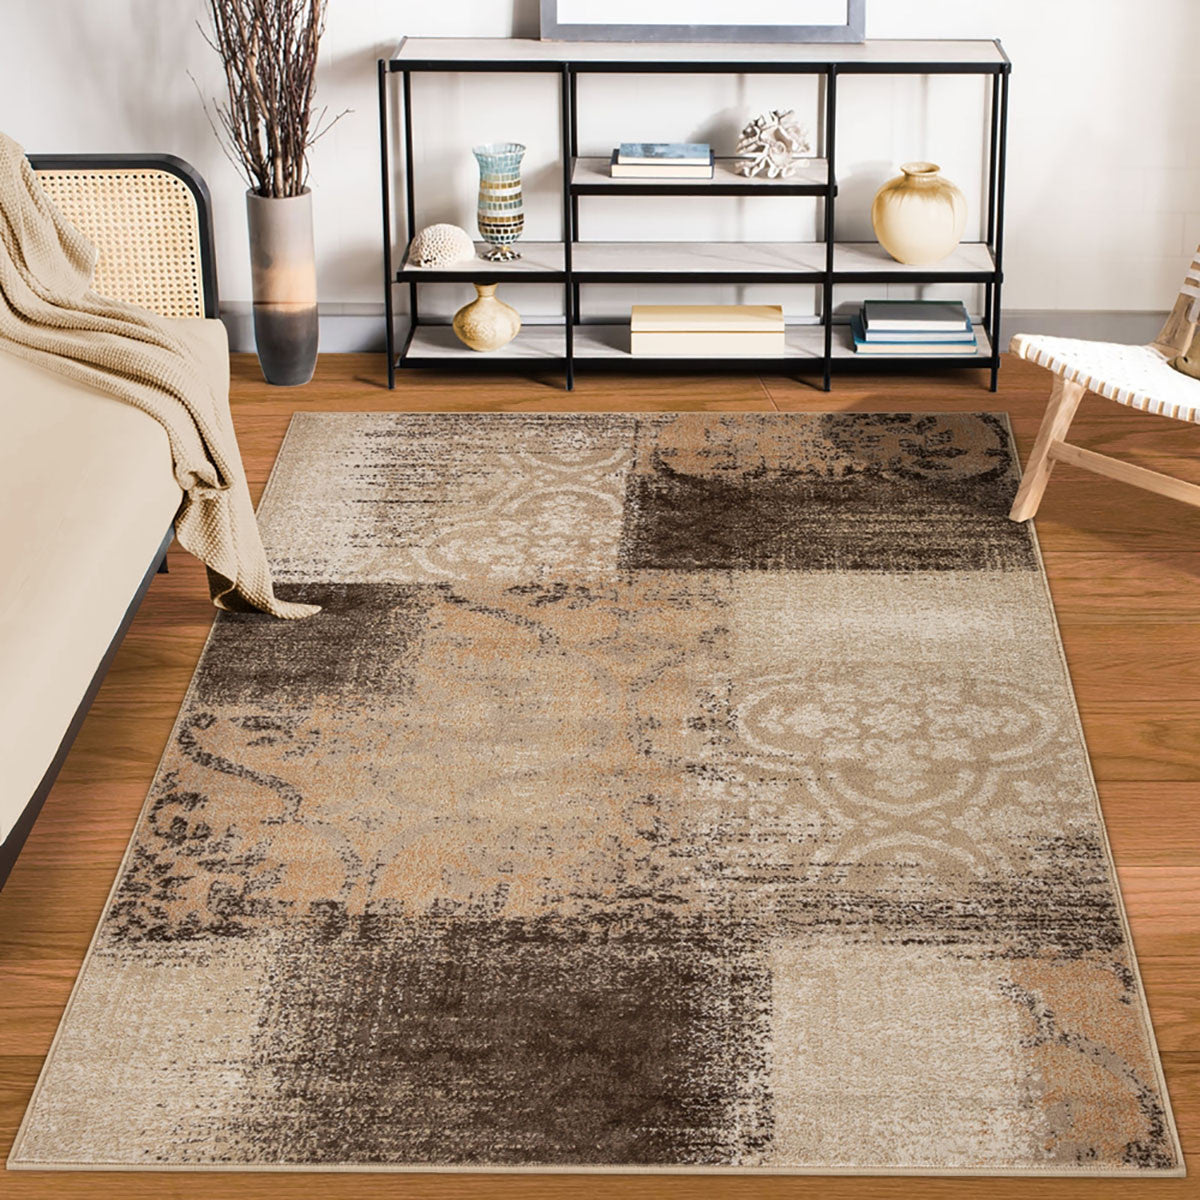 8' X 10' Beige Gray And Black Damask Distressed Stain Resistant Area Rug